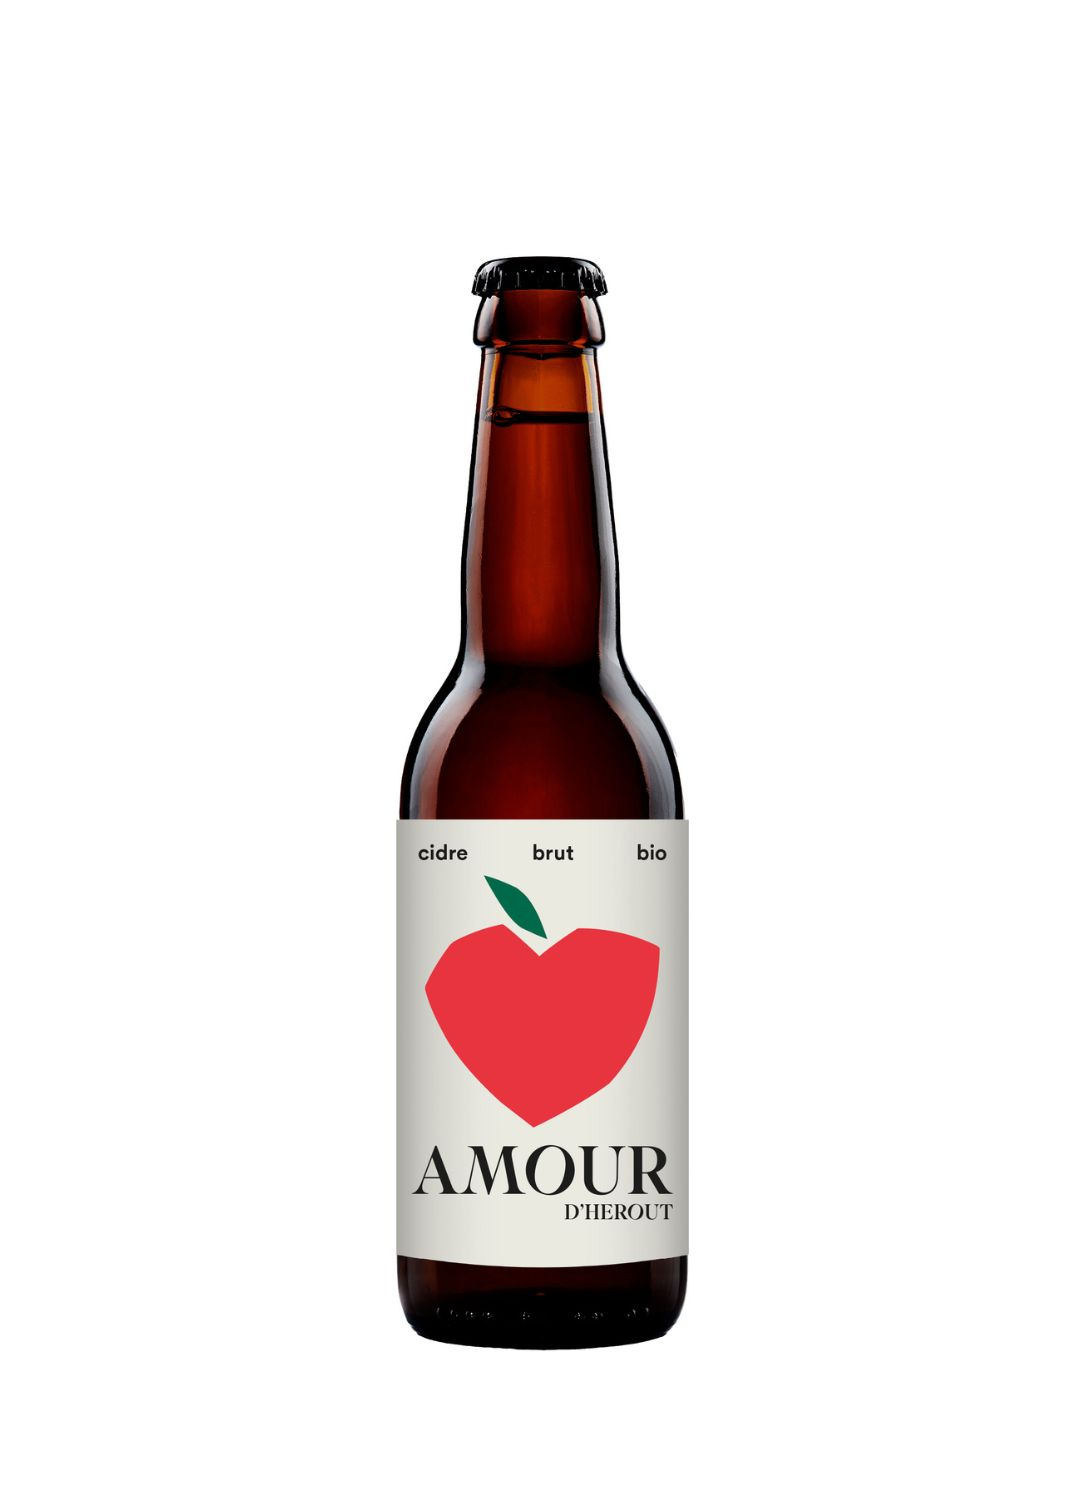 Bottle of Maison Herout Amour Cider from French Cider & Spirits